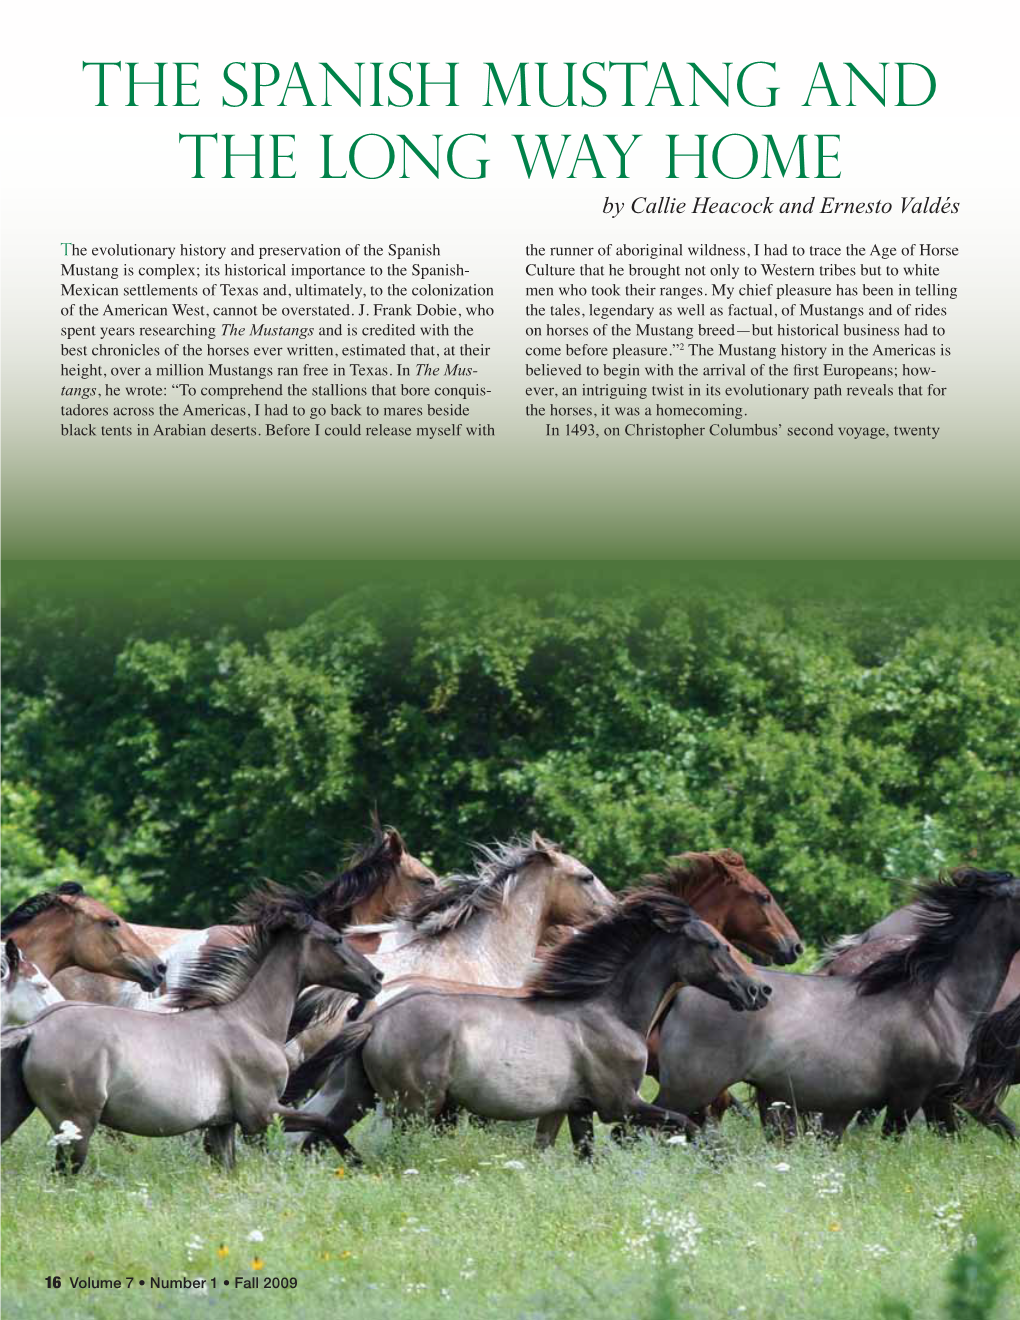 The Spanish Mustang and the Long Way Home by Callie Heacock and Ernesto Valdés